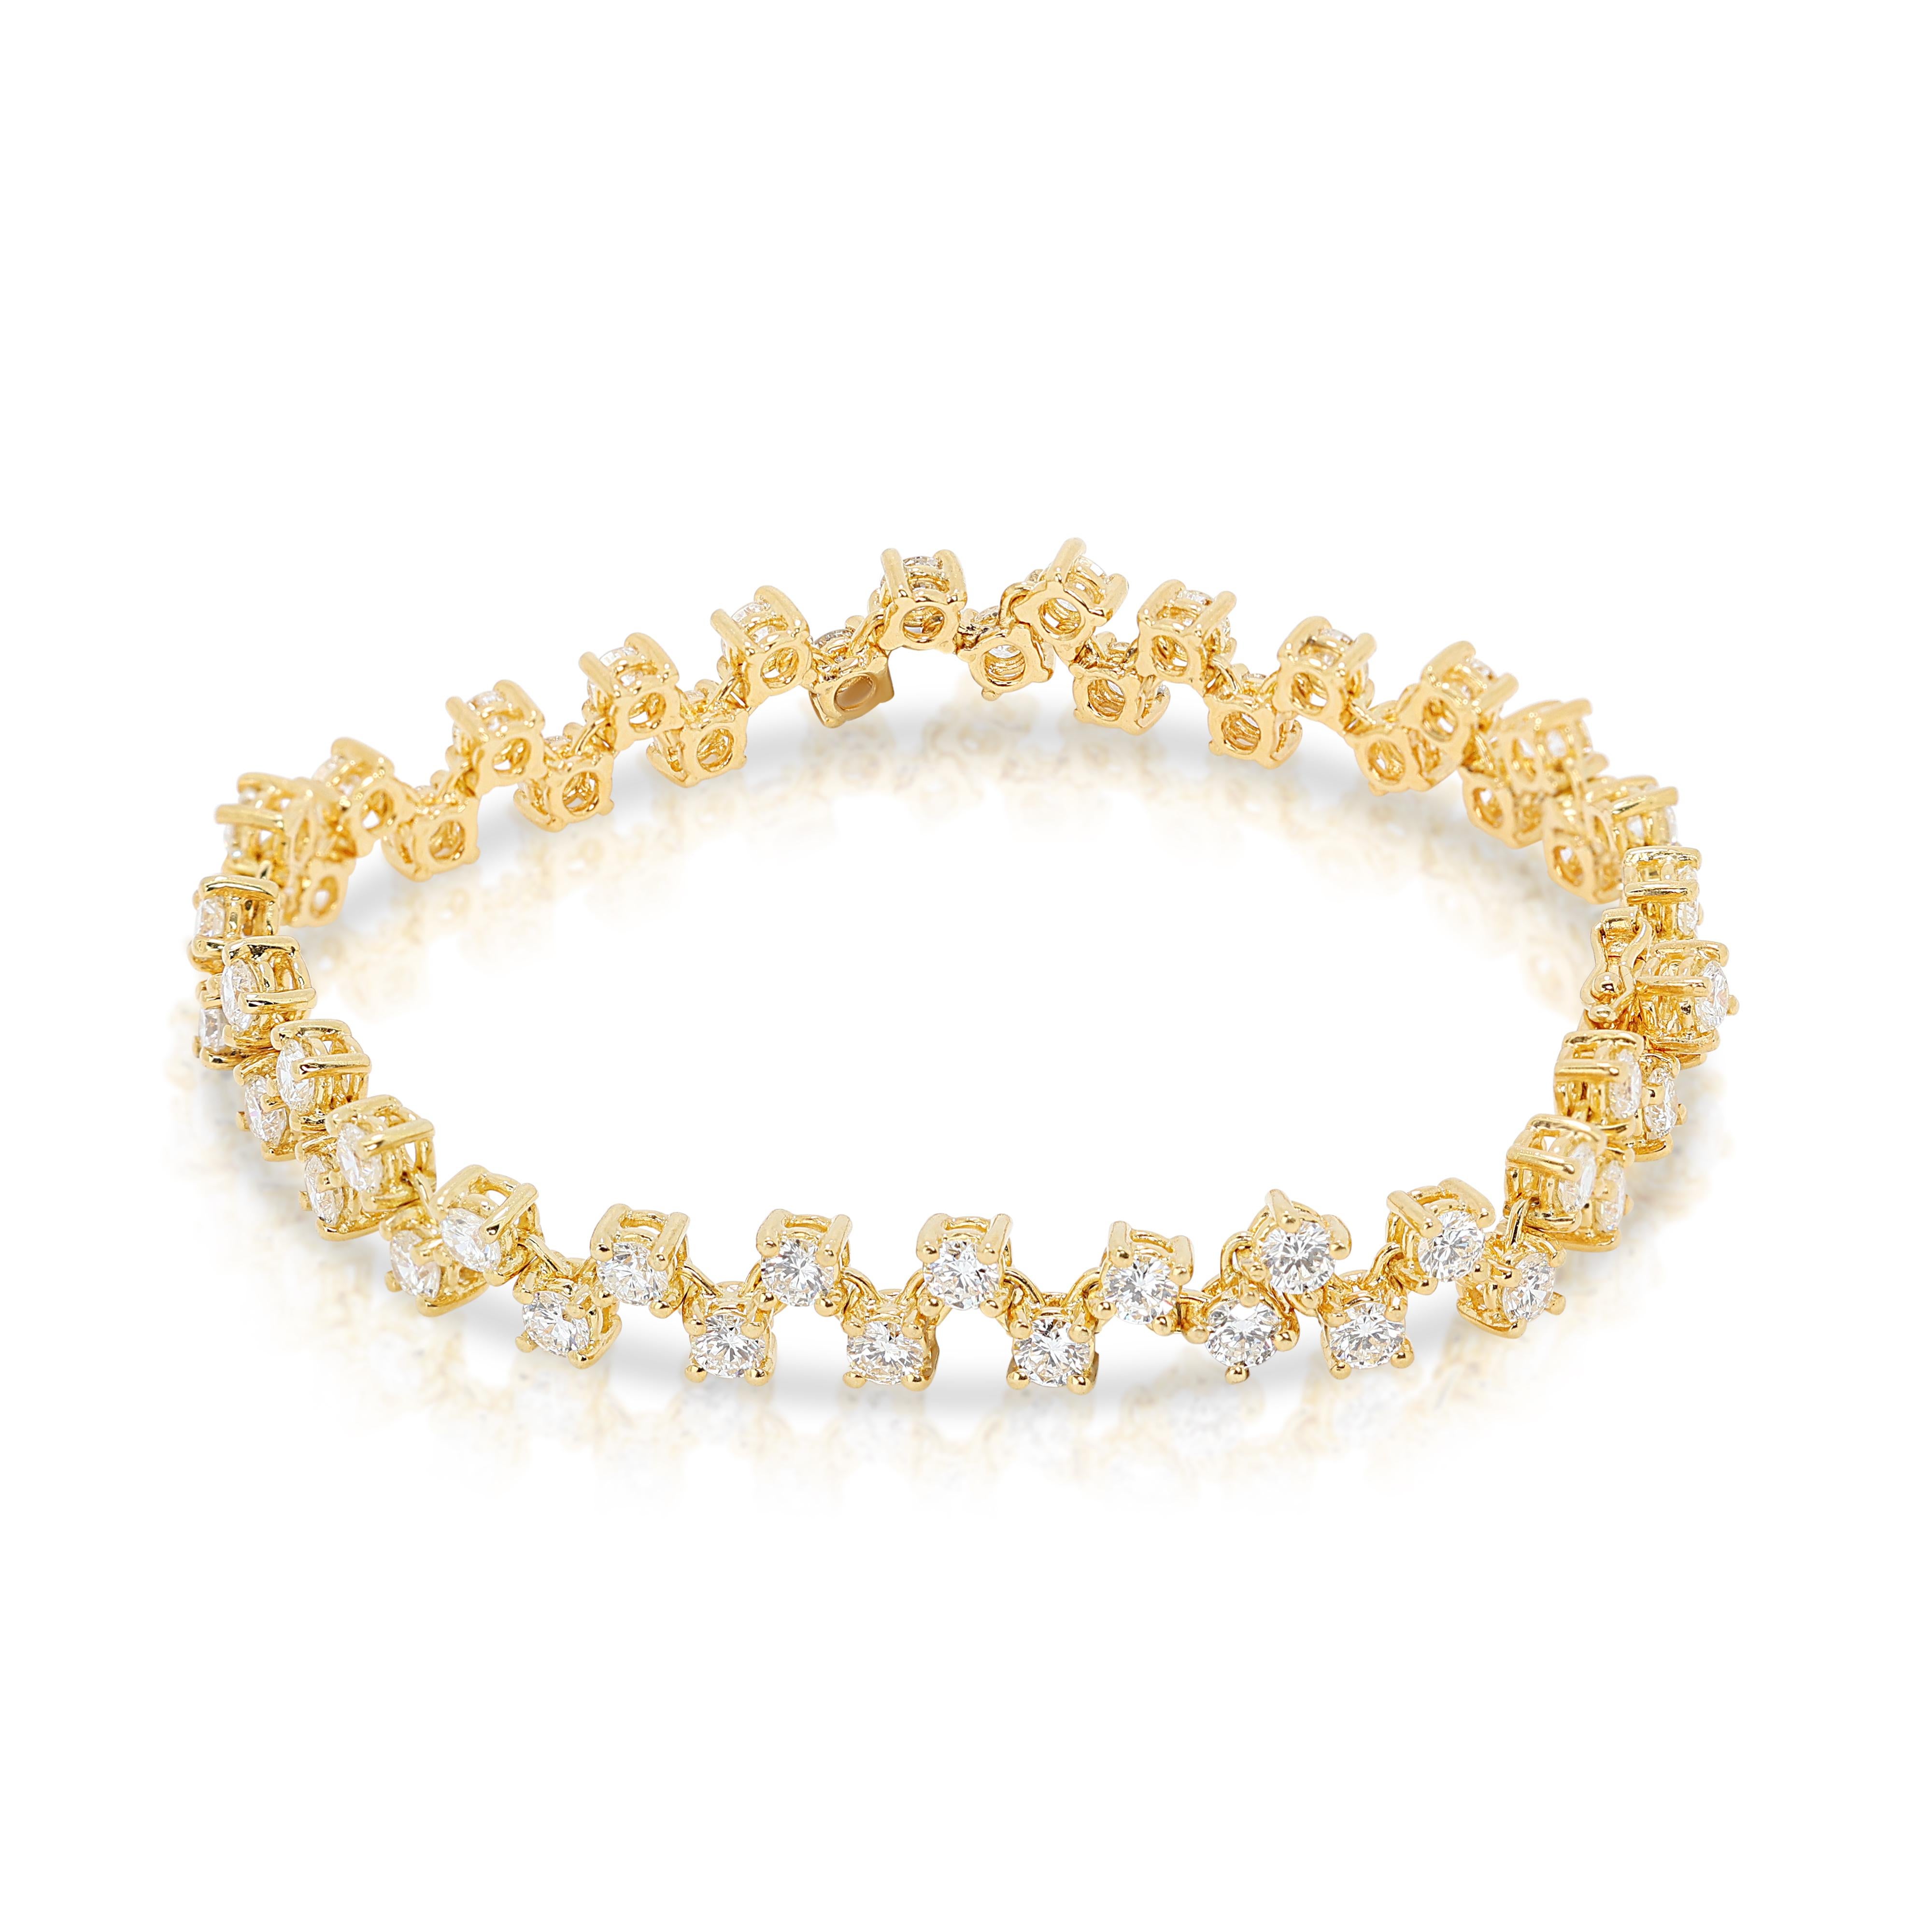 Round Cut Sophisticated 4.32ct Diamonds Bracelet in 18K Yellow Gold